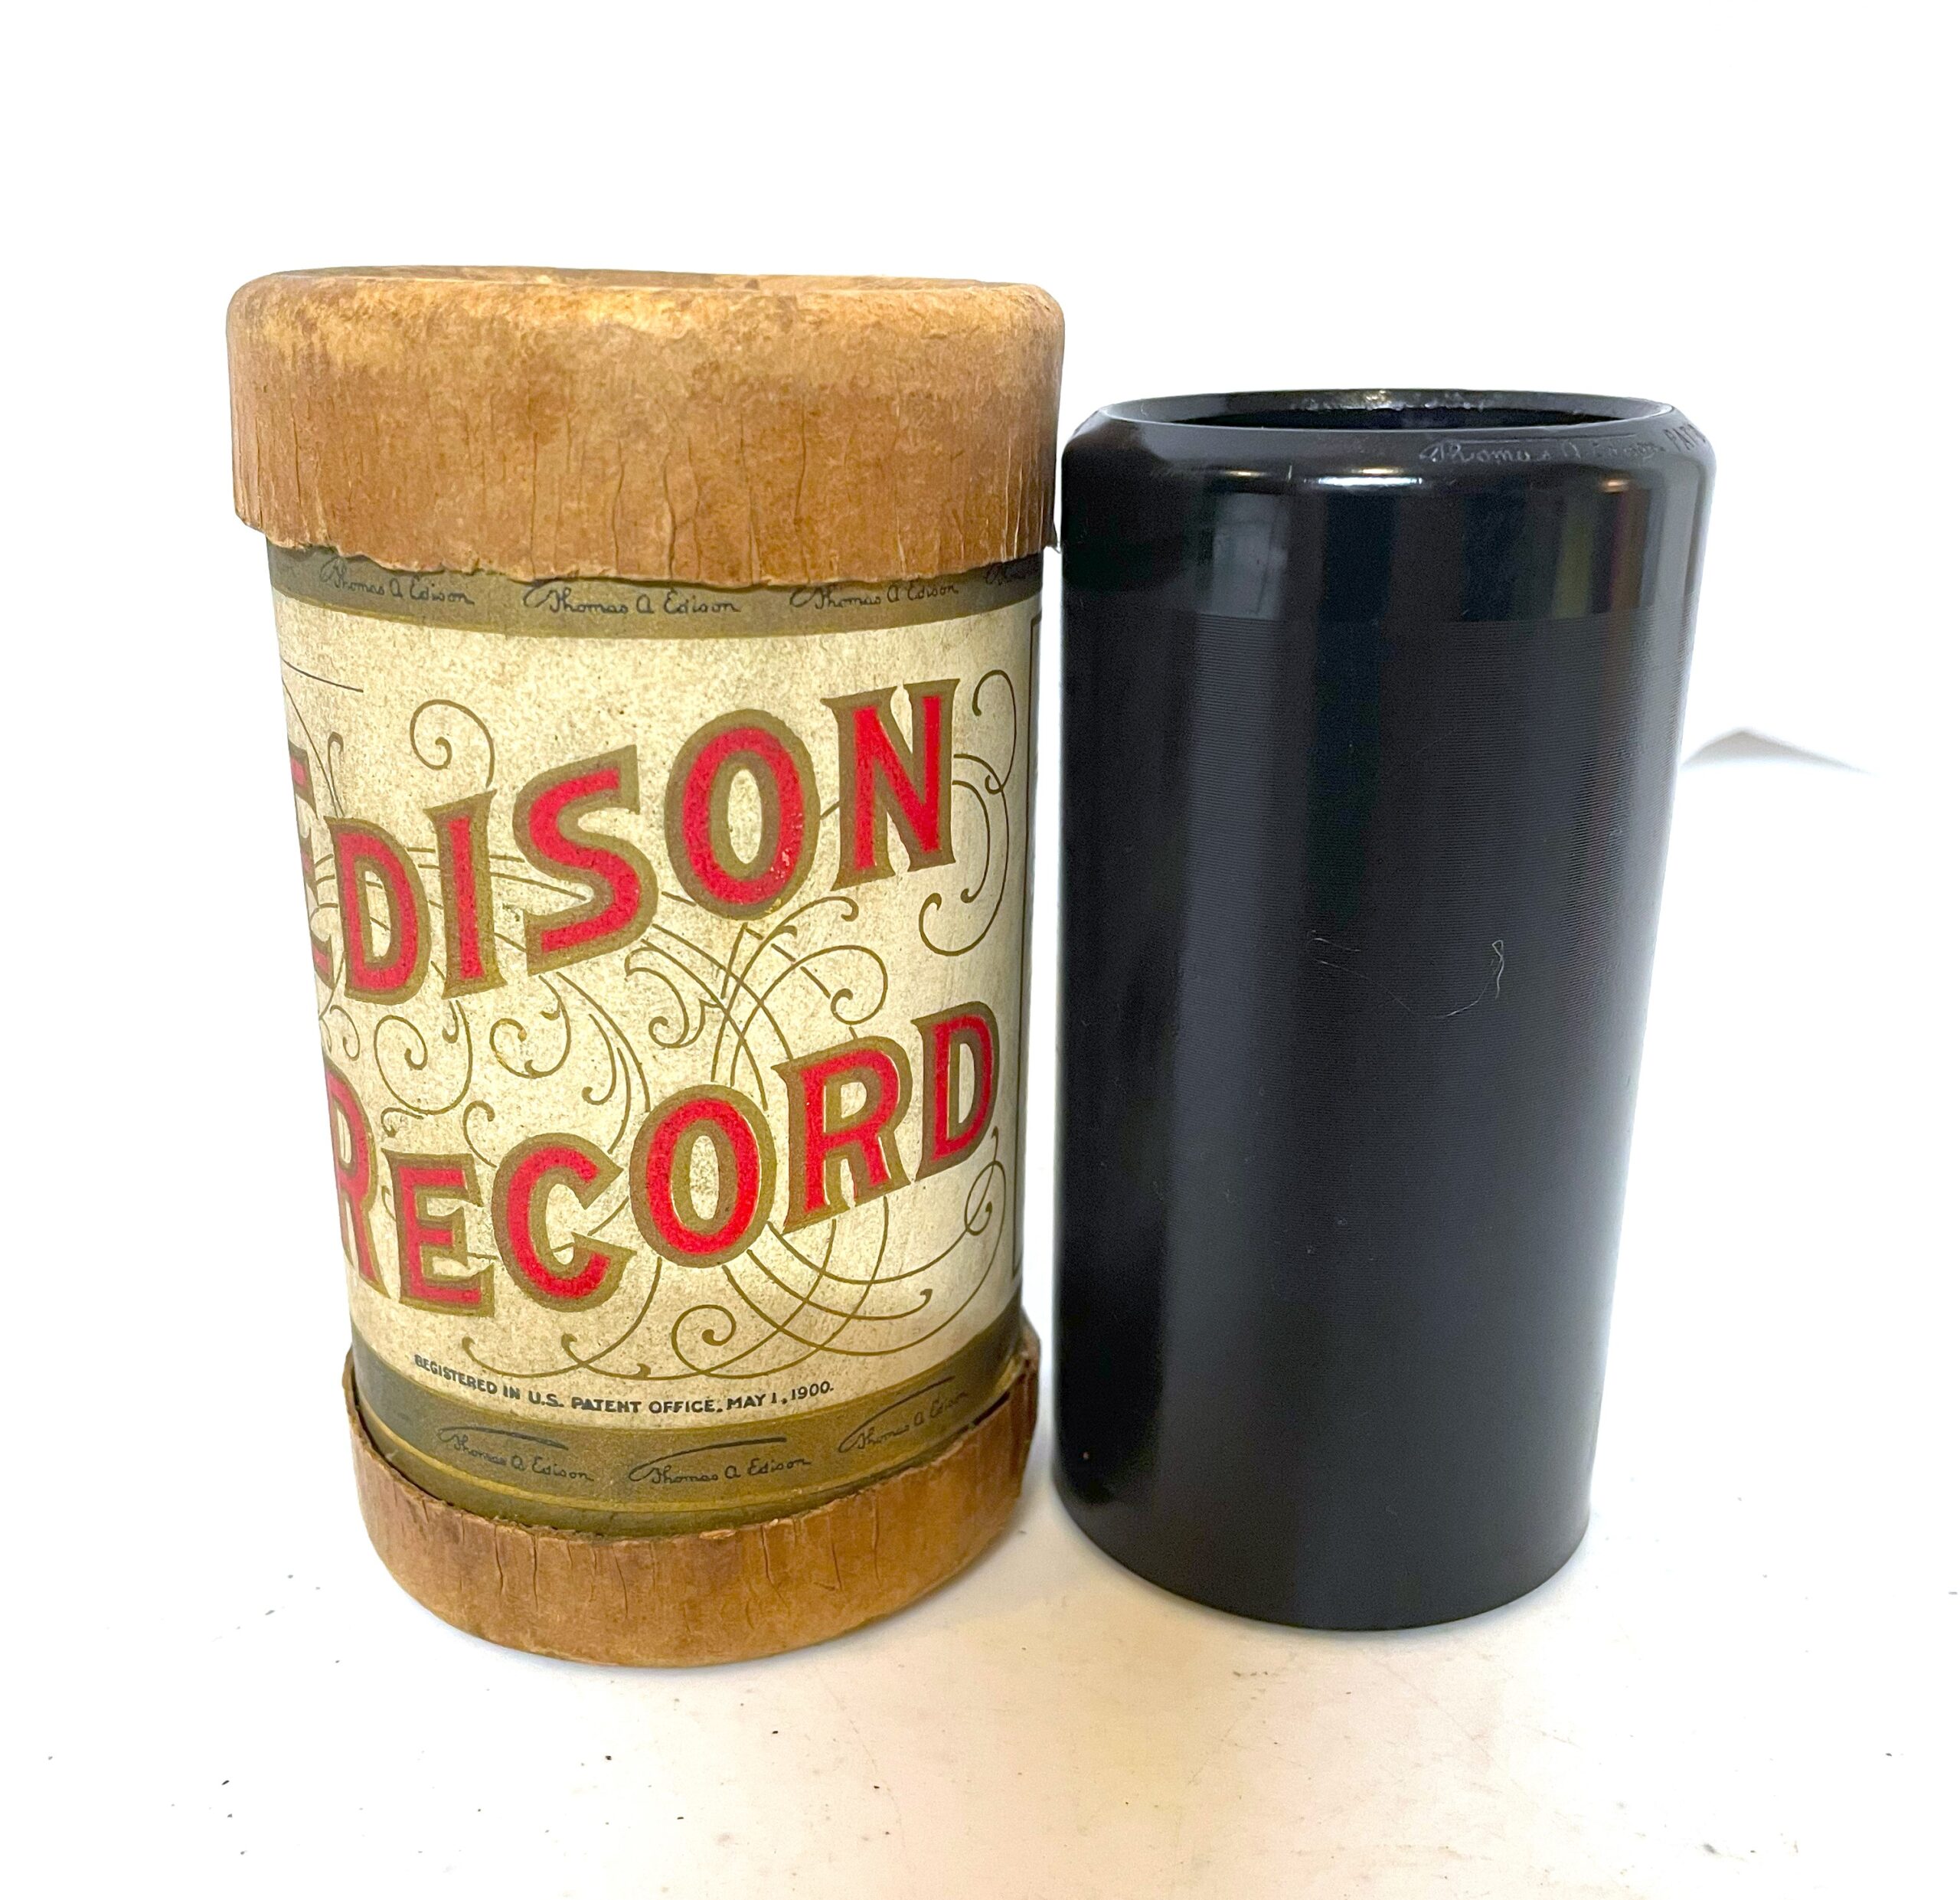 Edison 2-minute Cylinder…” Policeman O’Reilly on Duty”